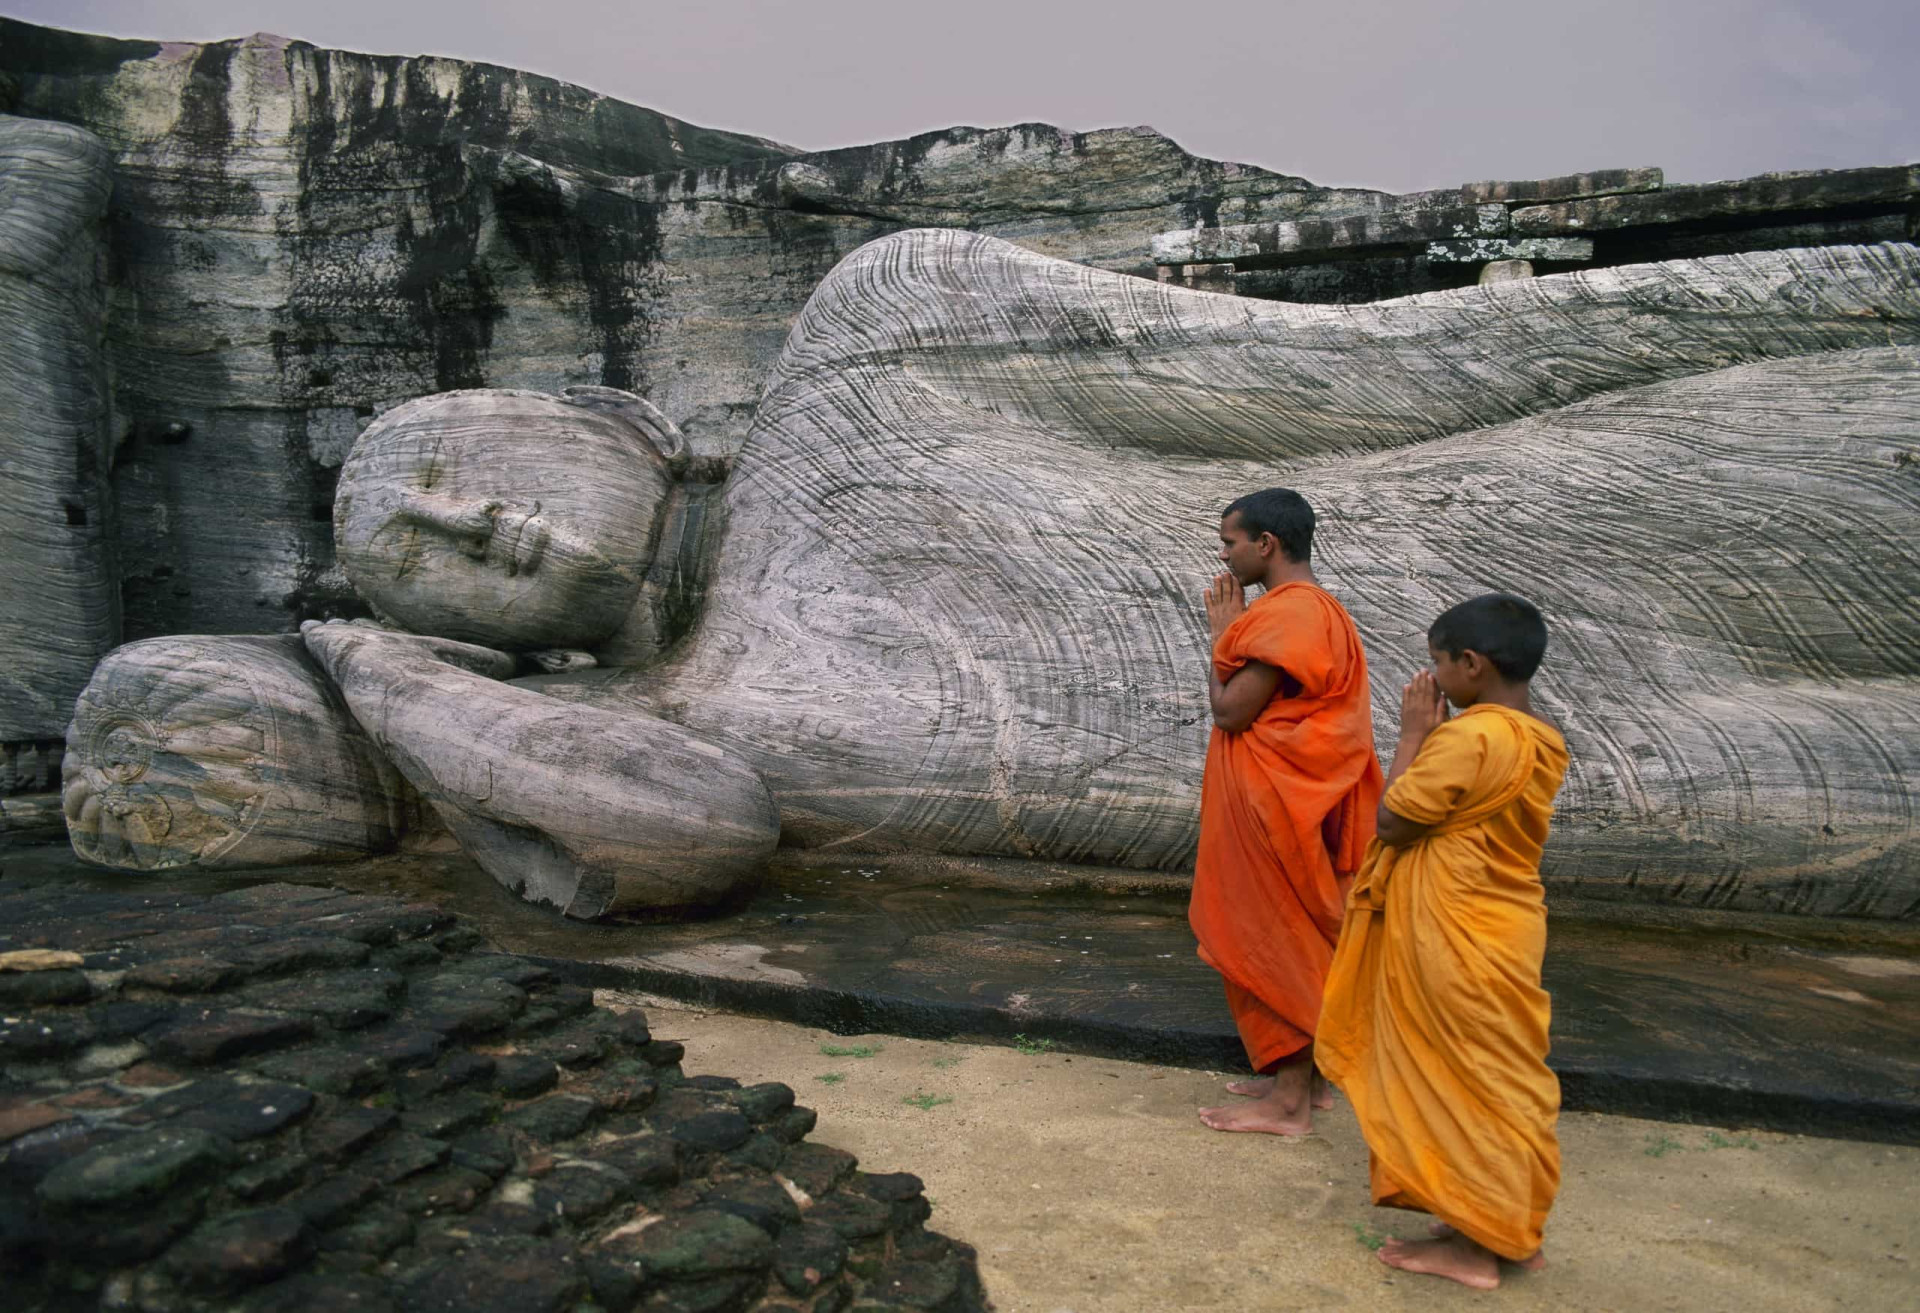 <p>The Gal Vihara features four rock relief statues of the Buddha. Pictured is a reclining figure.</p><p>You may also like:<a href="https://www.starsinsider.com/n/186481?utm_source=msn.com&utm_medium=display&utm_campaign=referral_description&utm_content=273472v10en-us"> Stars who are sexual abuse survivors</a></p>